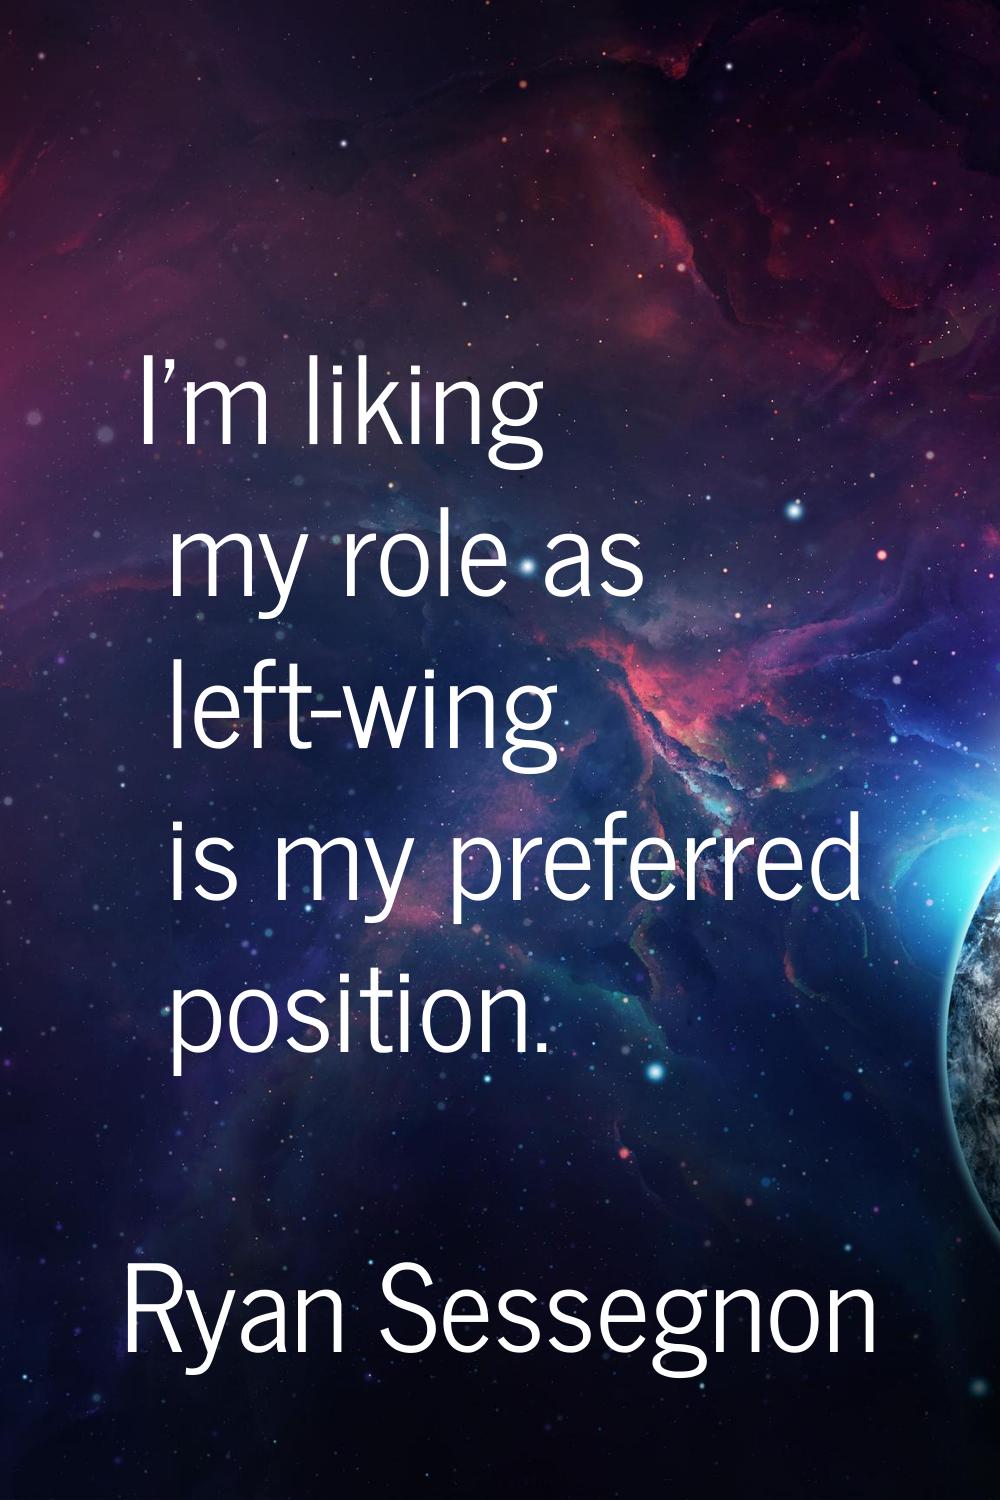 I'm liking my role as left-wing is my preferred position.